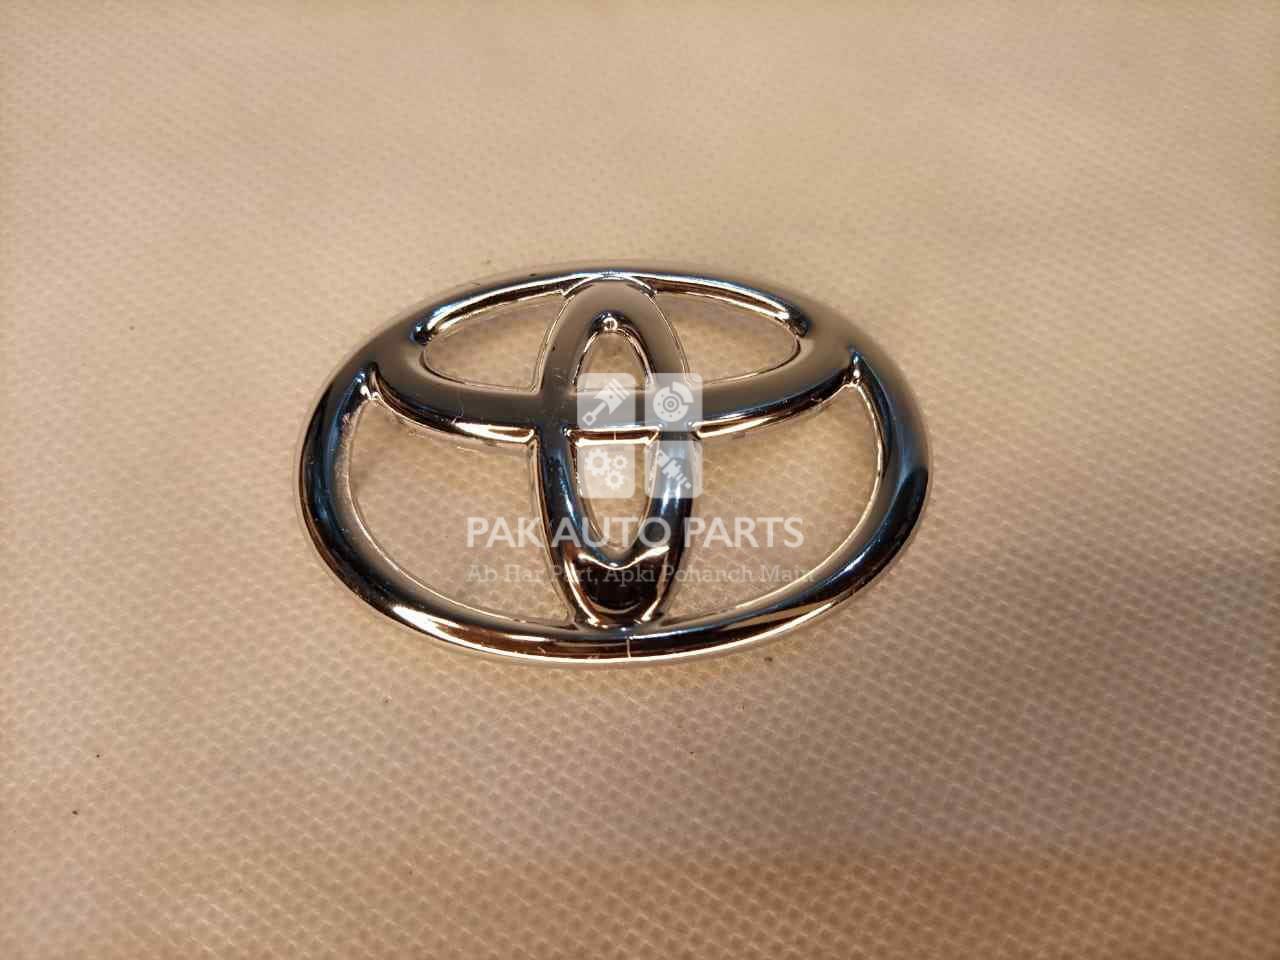 Picture of Toyota Steering Wheel Logo